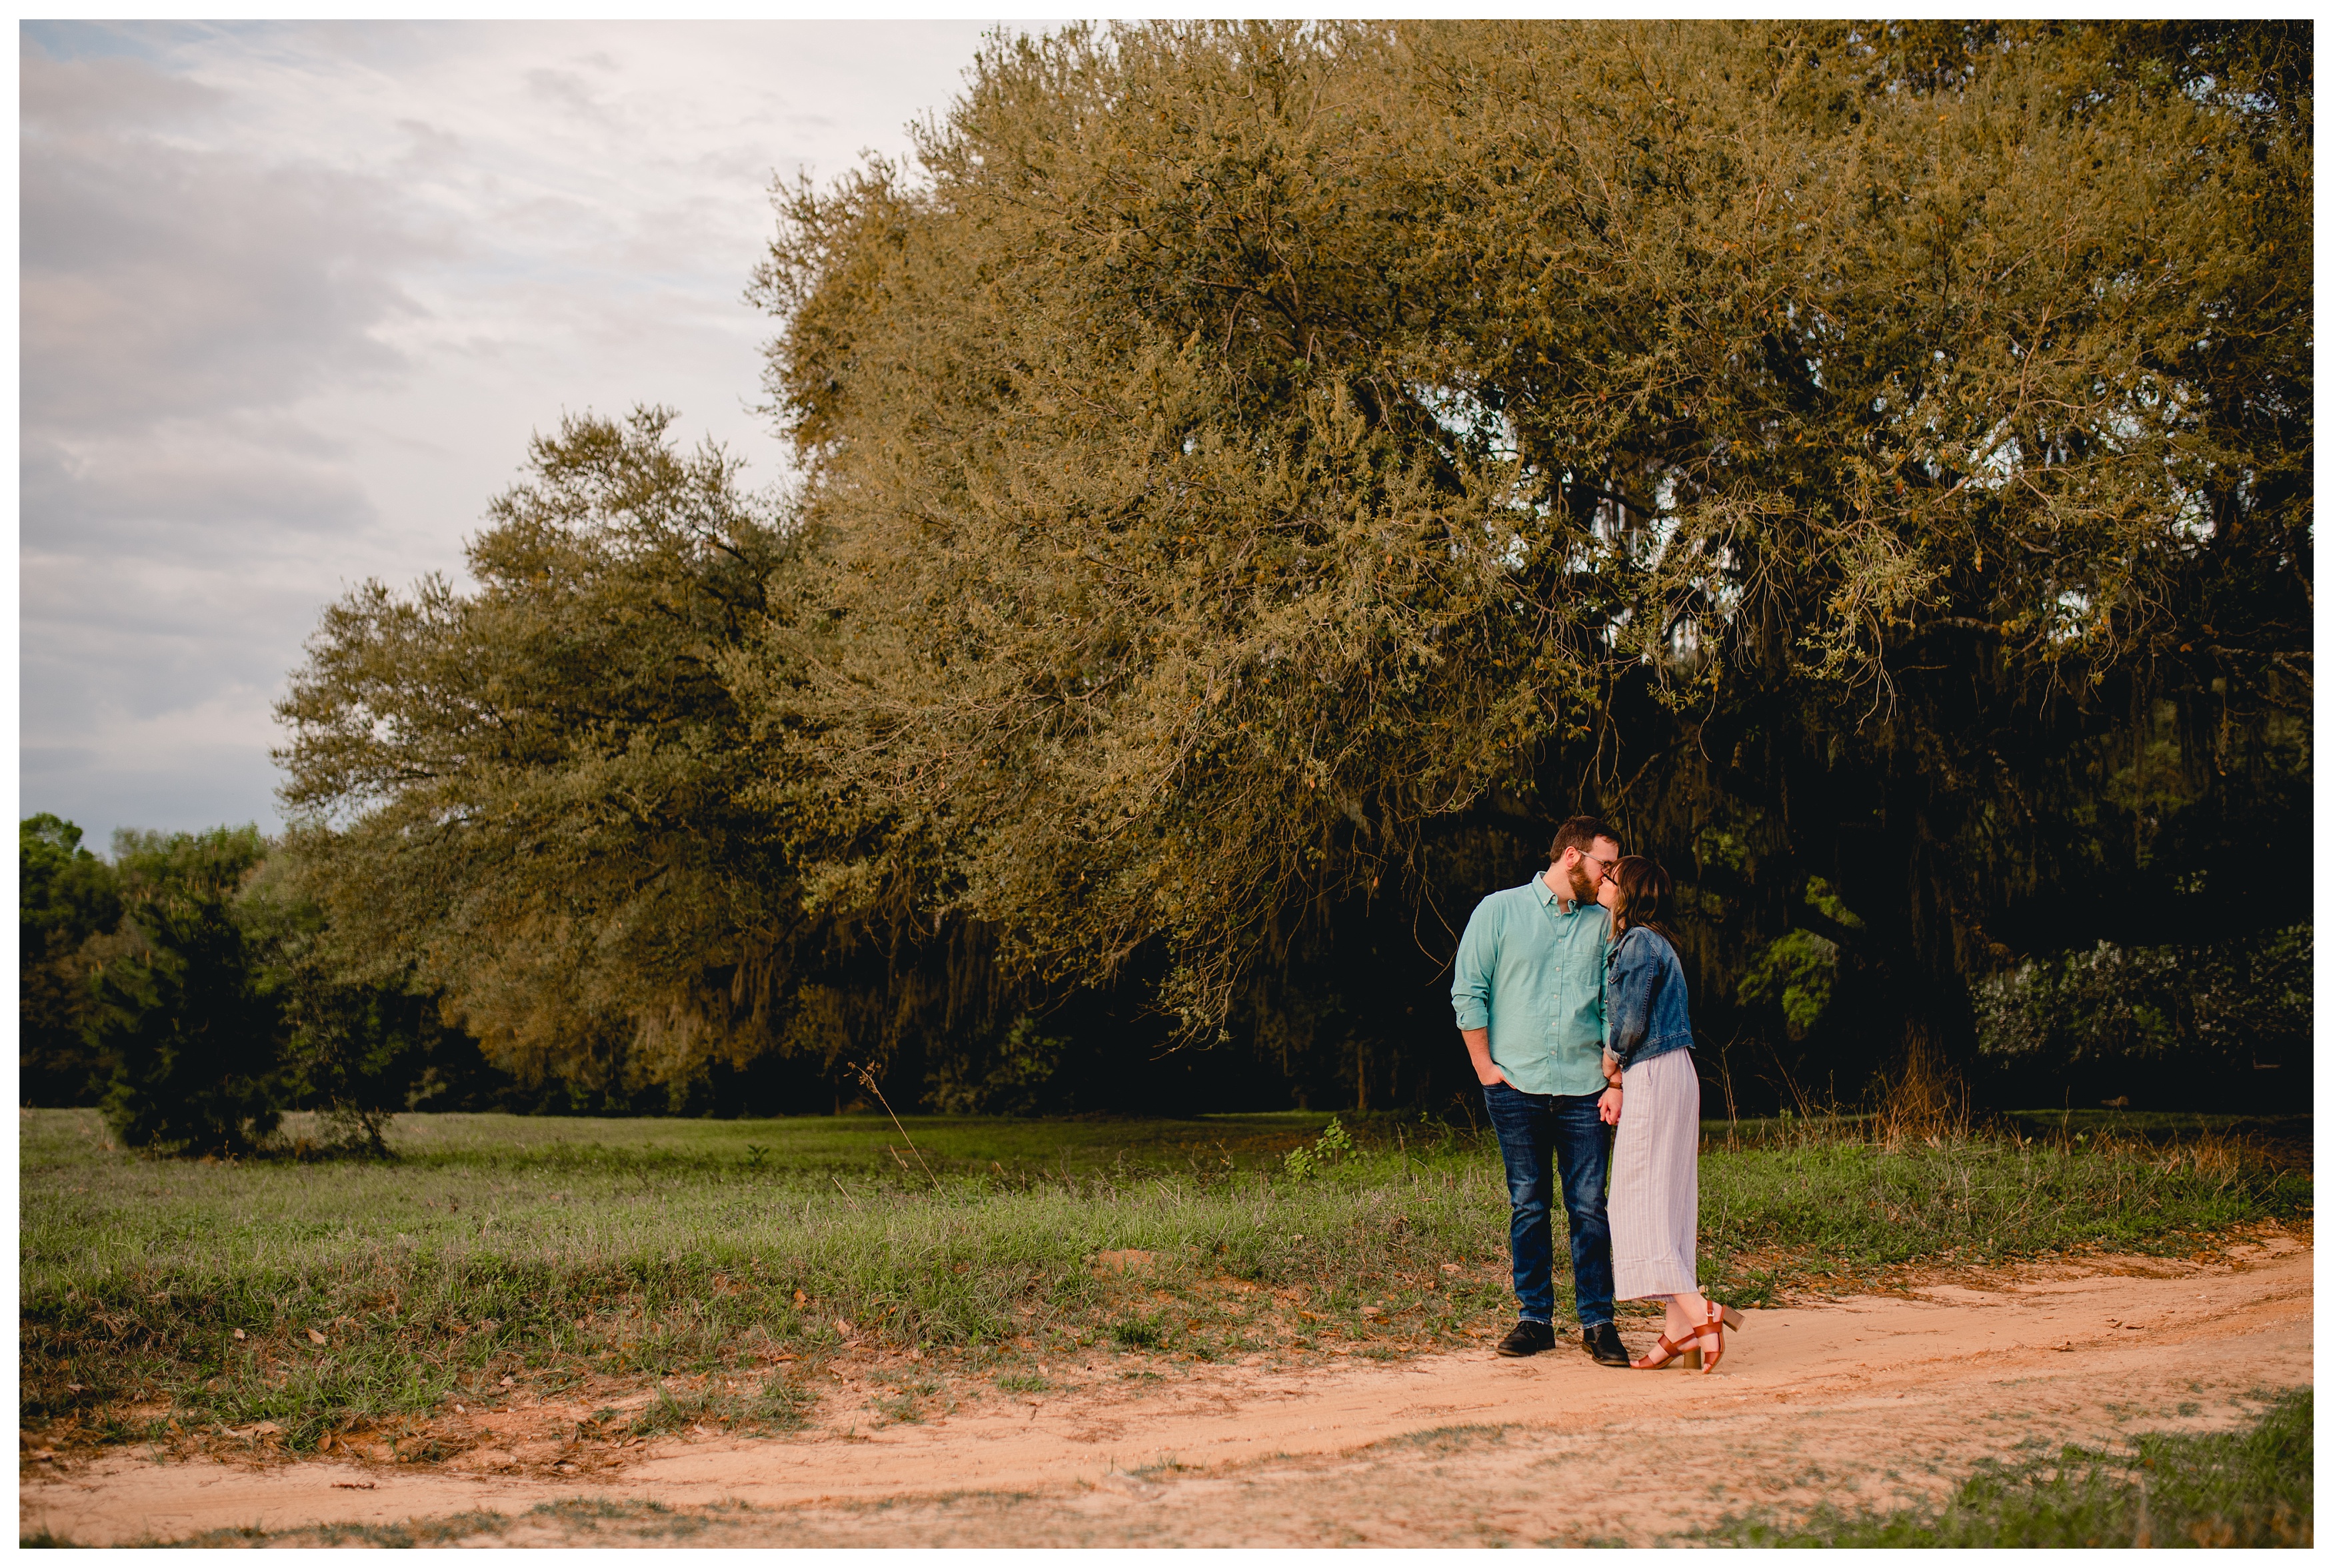 Engagement photoshoot on family farm in Madison, FL. Shelly Williams Photography